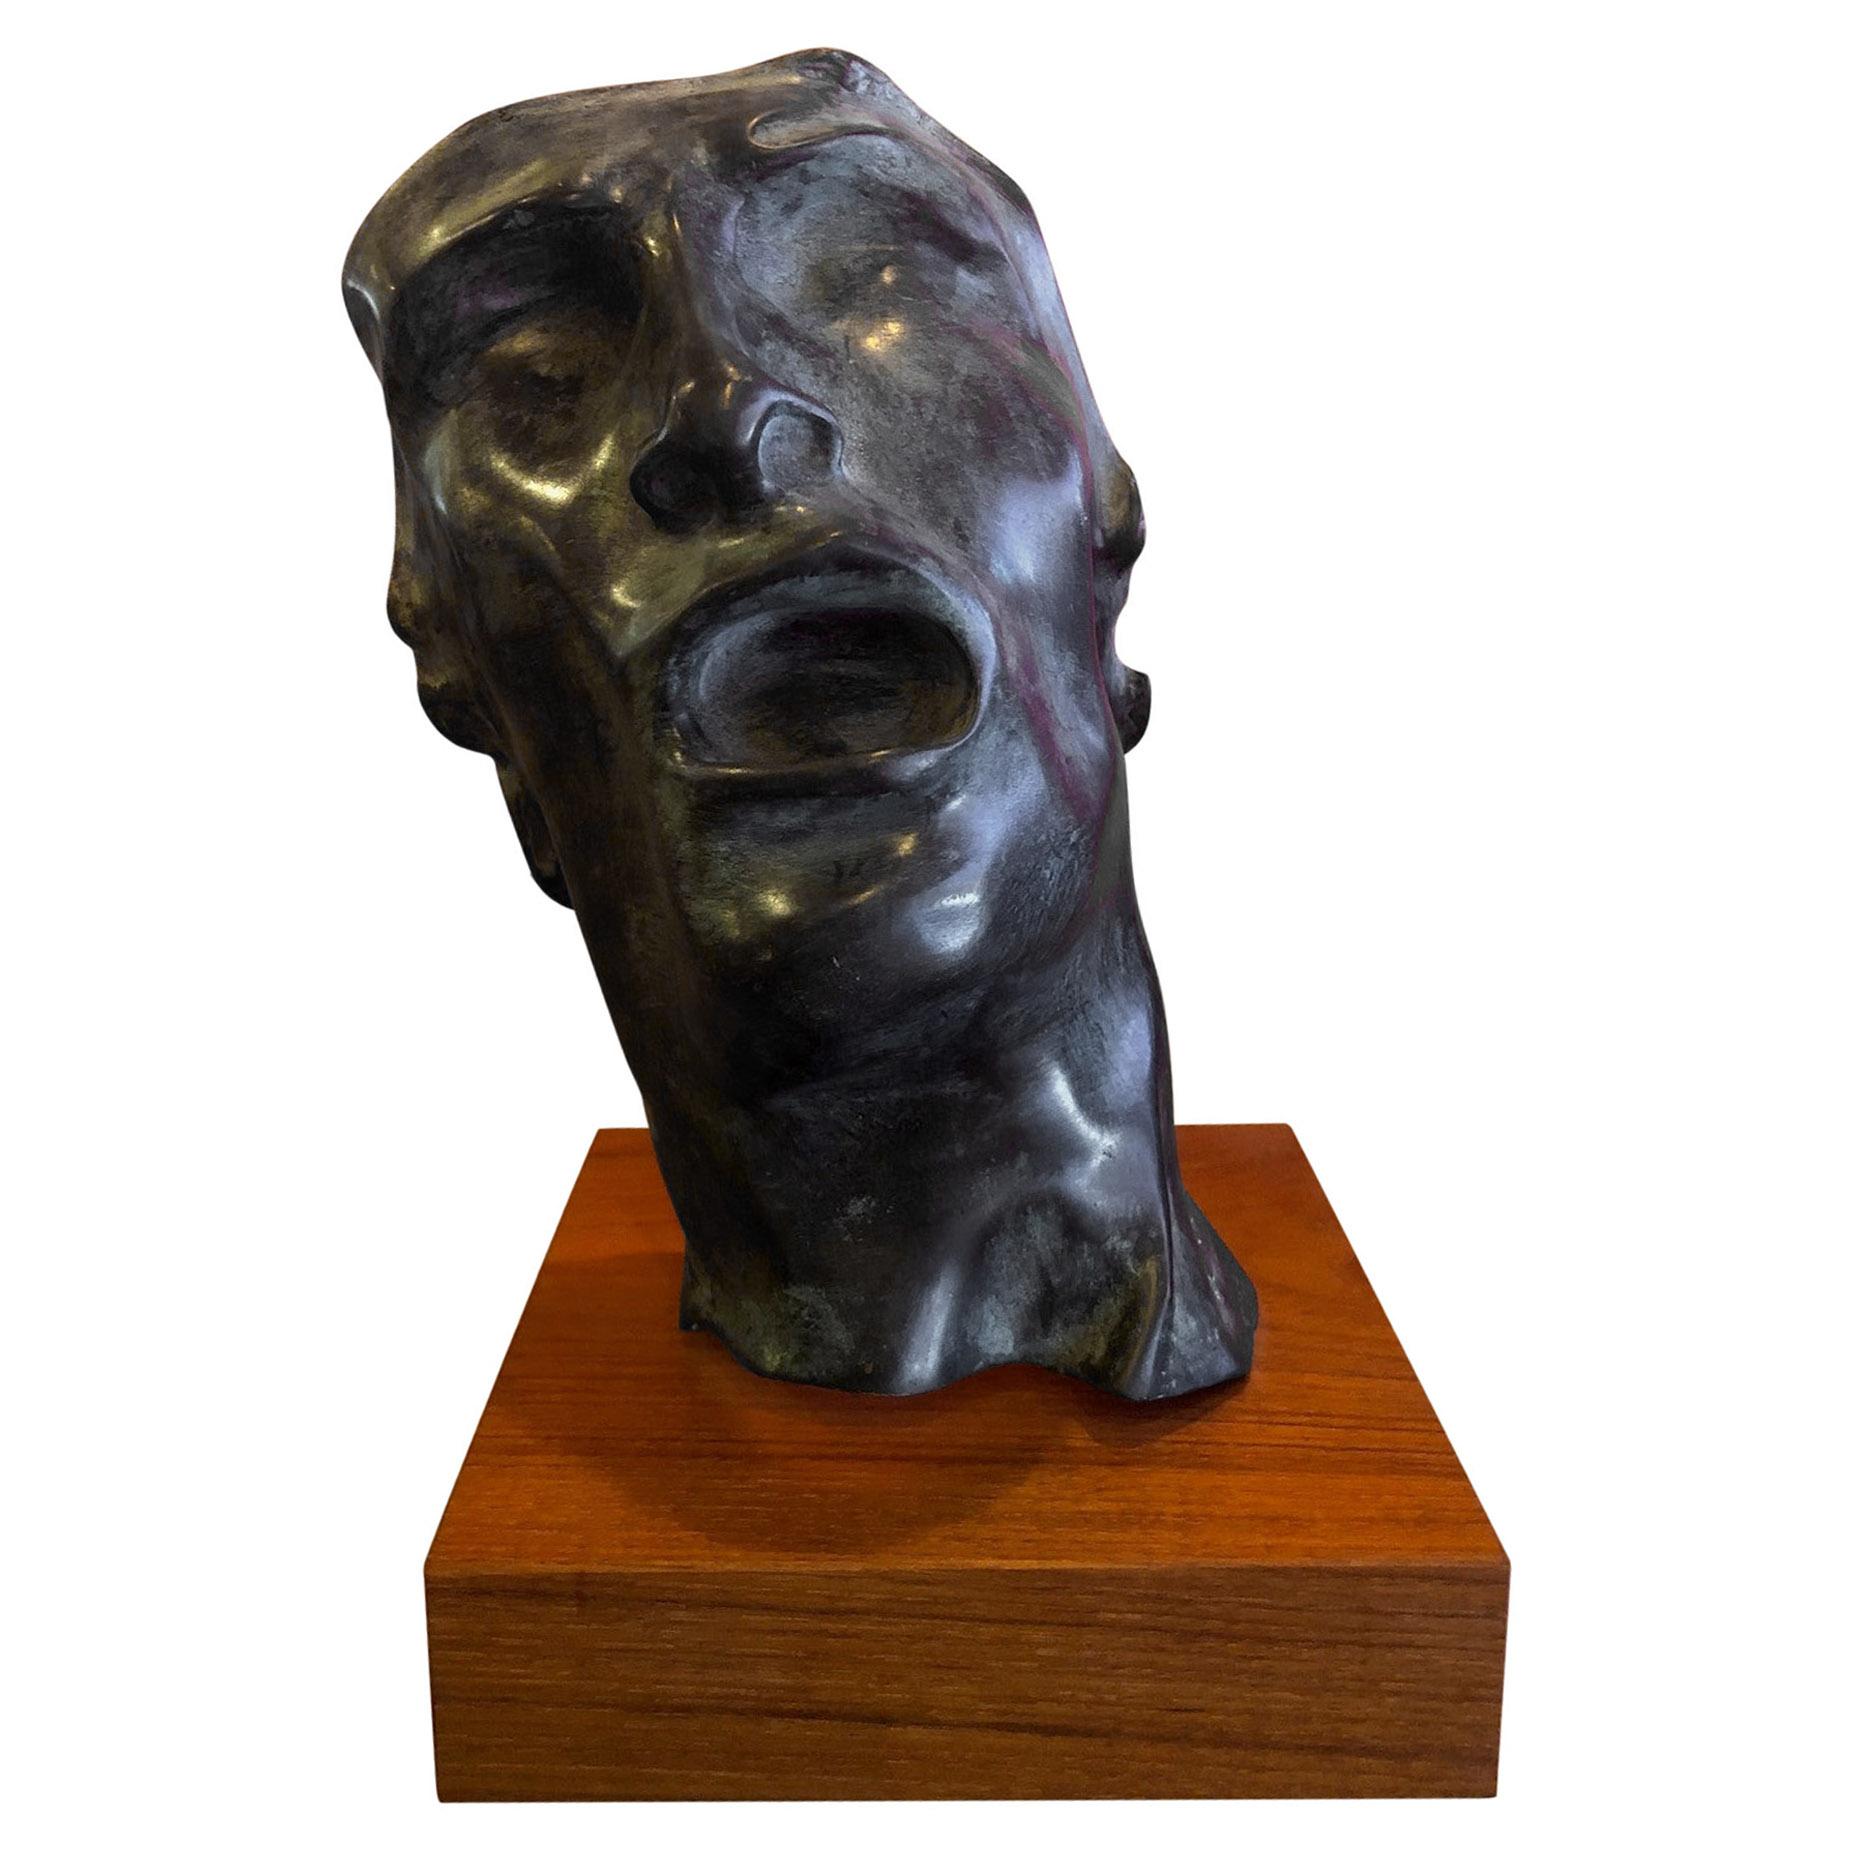 Verdigris Bronze Mask "Study of the Human Face" Sculpture by Auguste Rodin